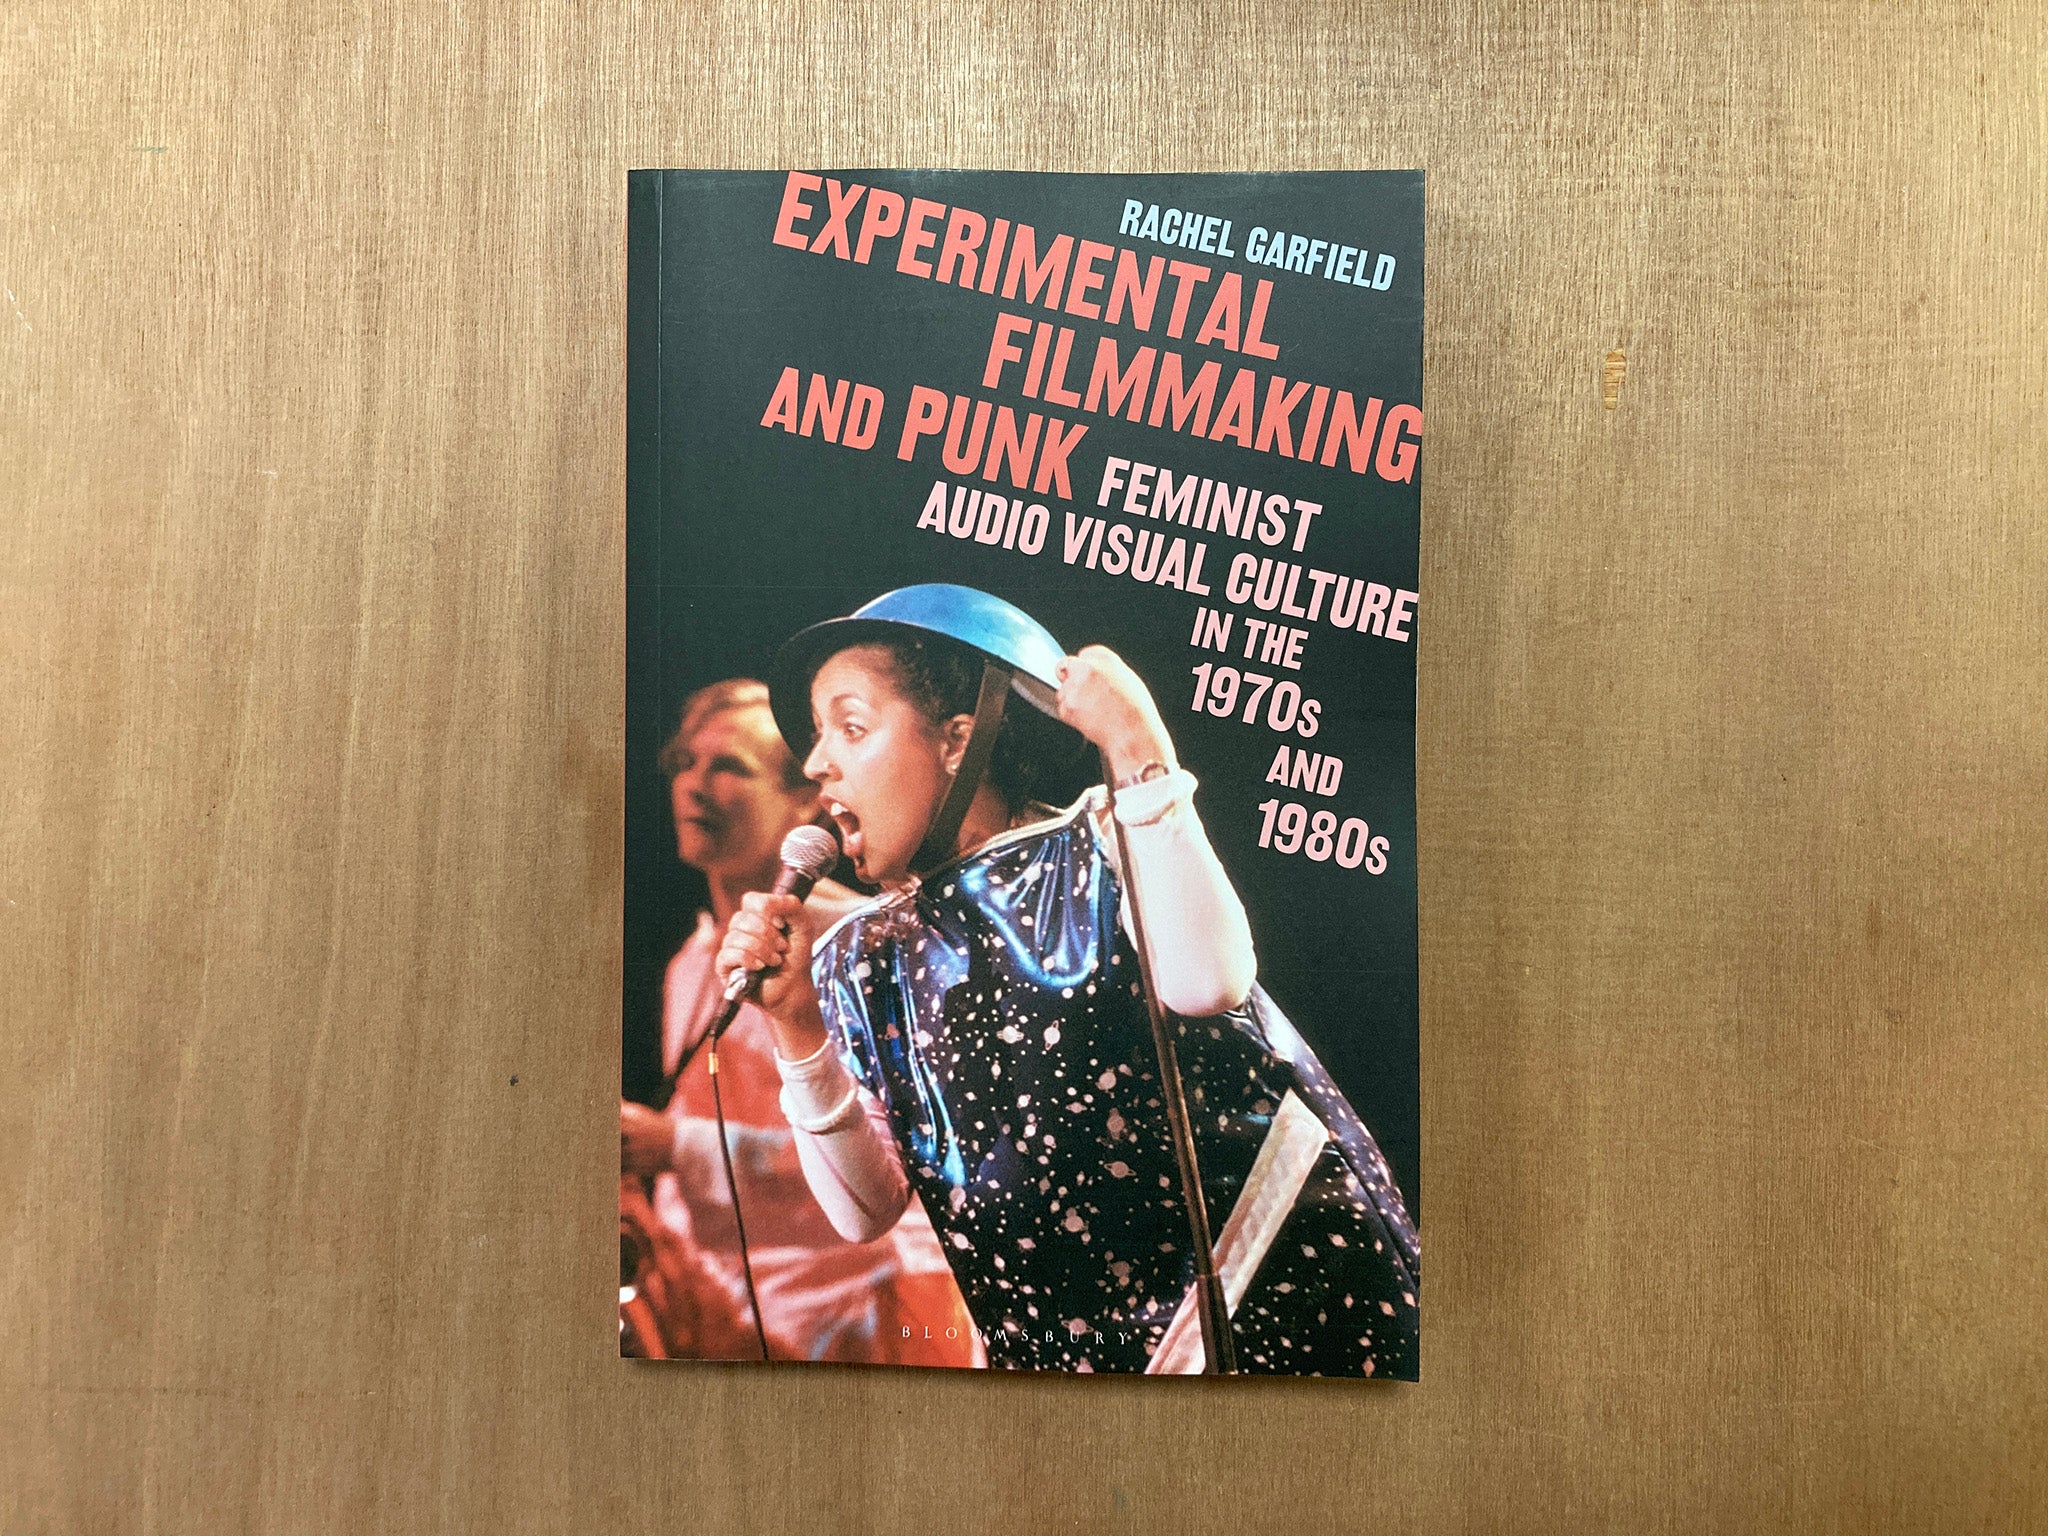 EXPERIMENTAL FILMMAKING AND PUNK: FEMINIST AUDIO VISUAL CULTURE IN THE 1970S AND 1980S by Rachel Garfield